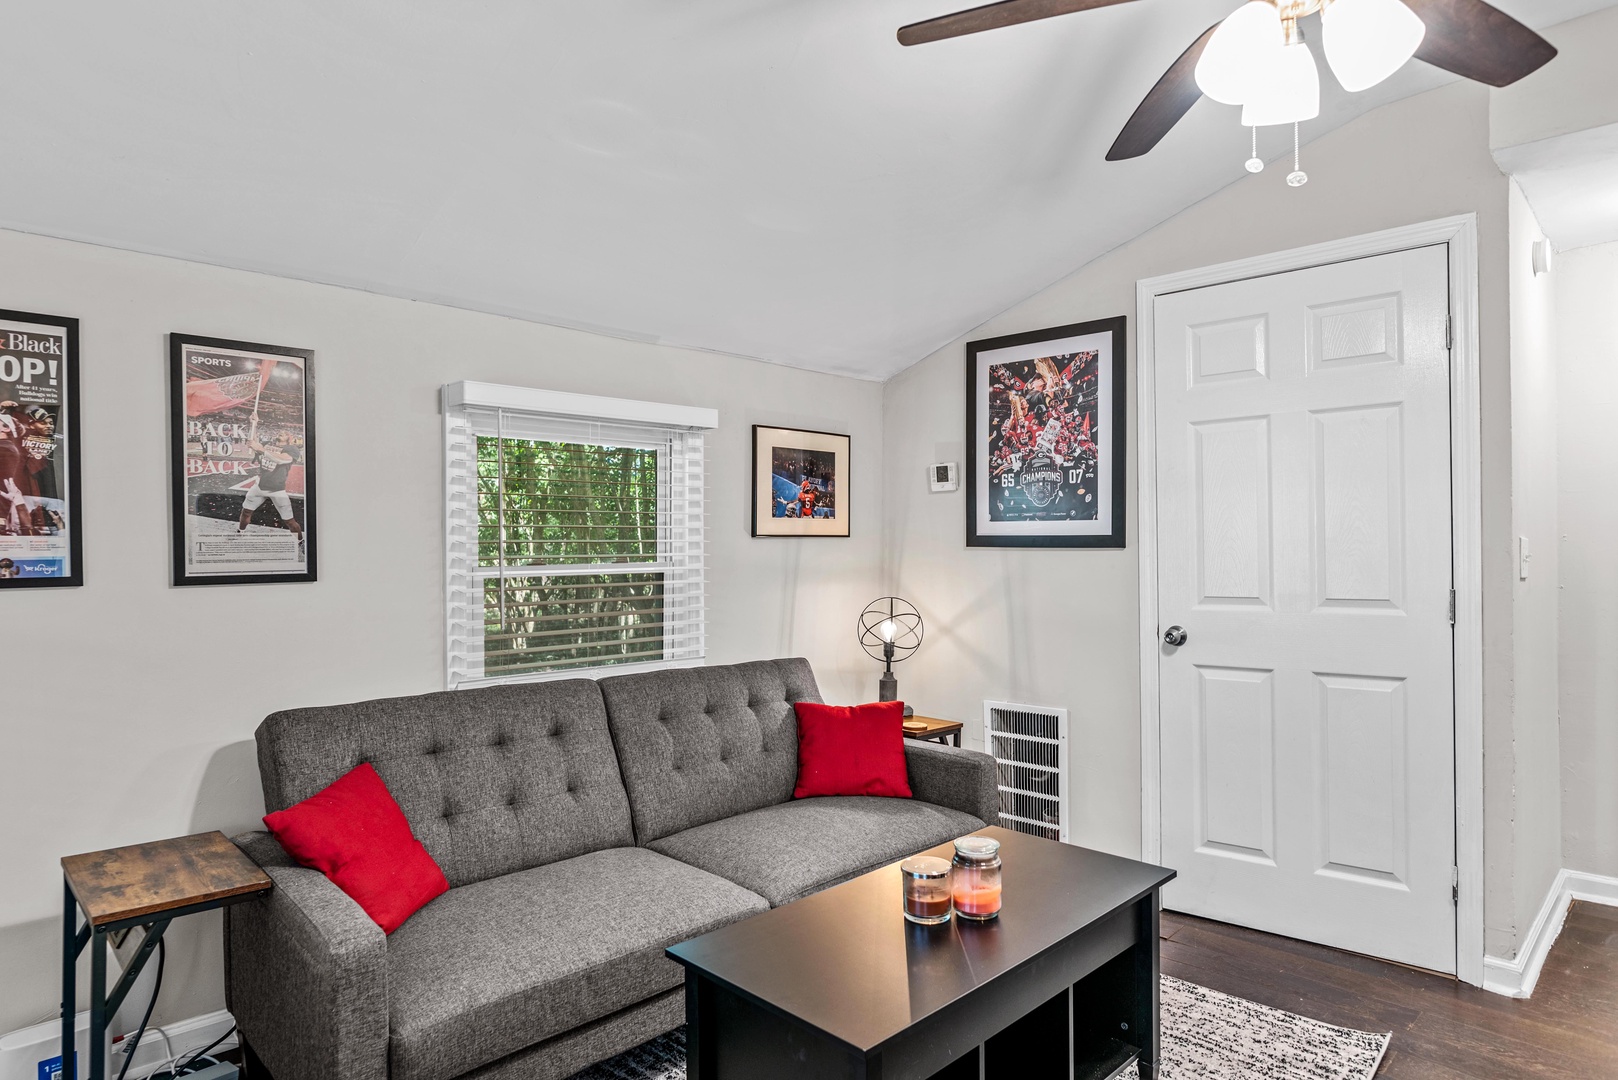 Relax in the cozy living room on the full-size futon